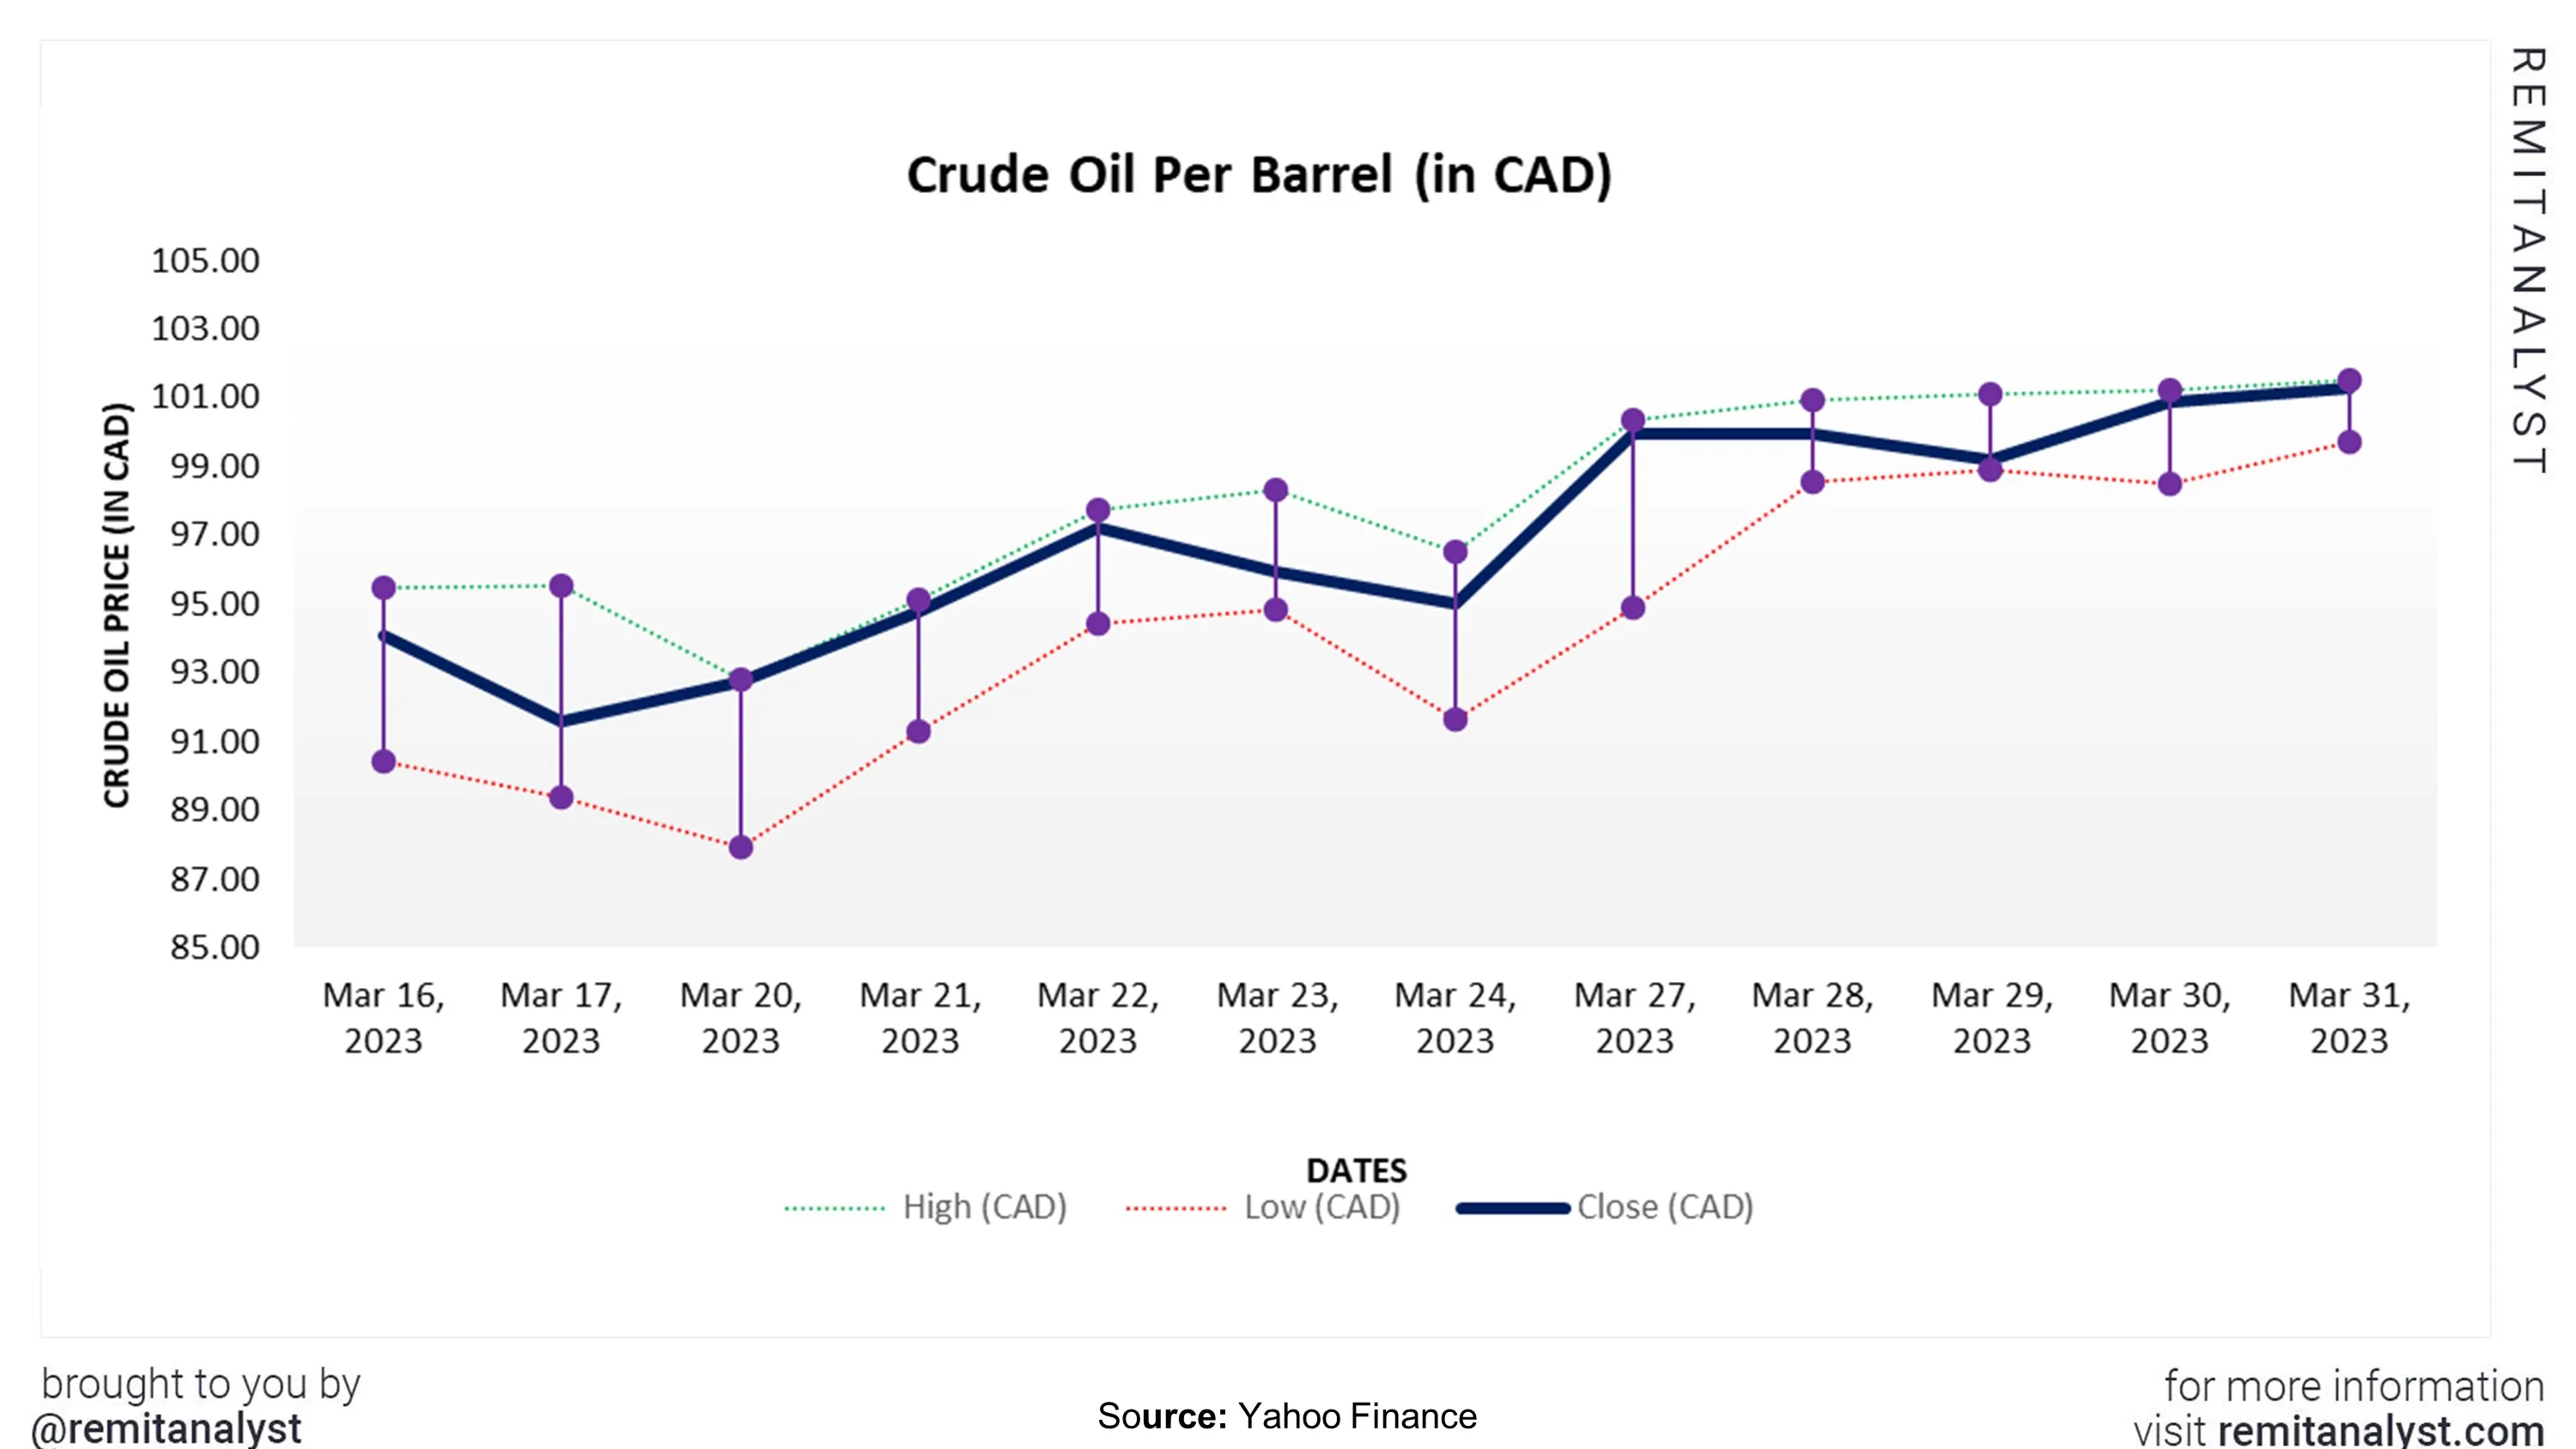 crude-oil-prices-canada-from-16-mar-2023-to-31-mar-2023